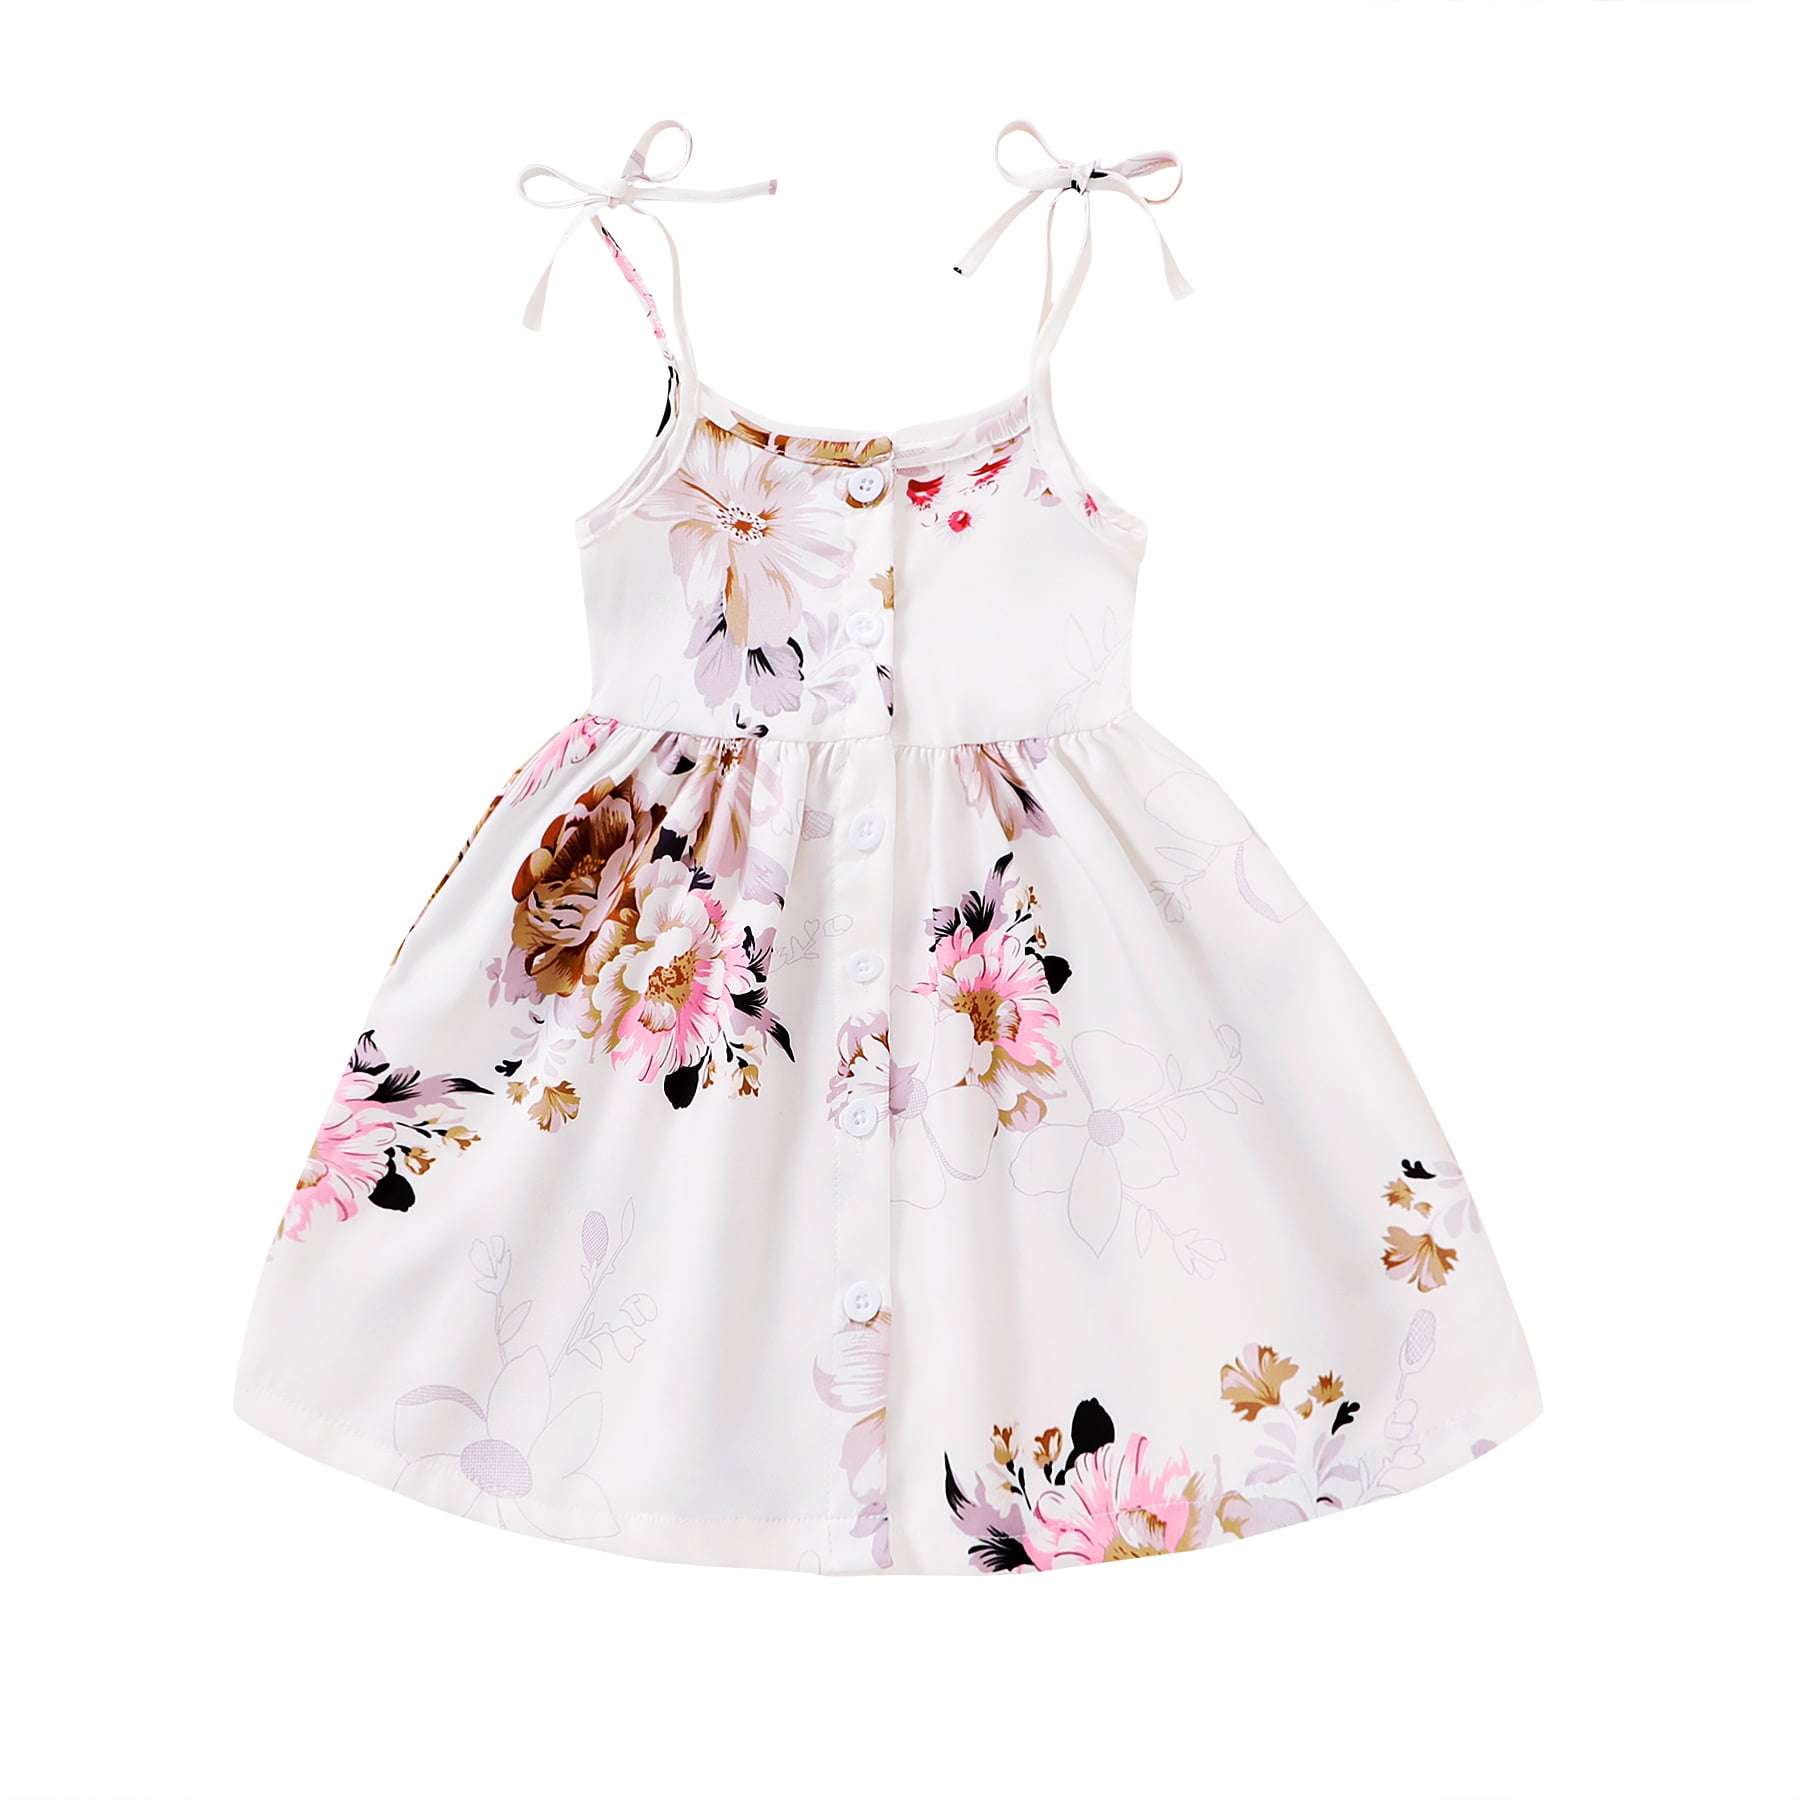 Younger Tree Baby Girls Summer Sling Dress Kid Vintage Floral Casual Sleeveless Dress Clothes for 4-5T